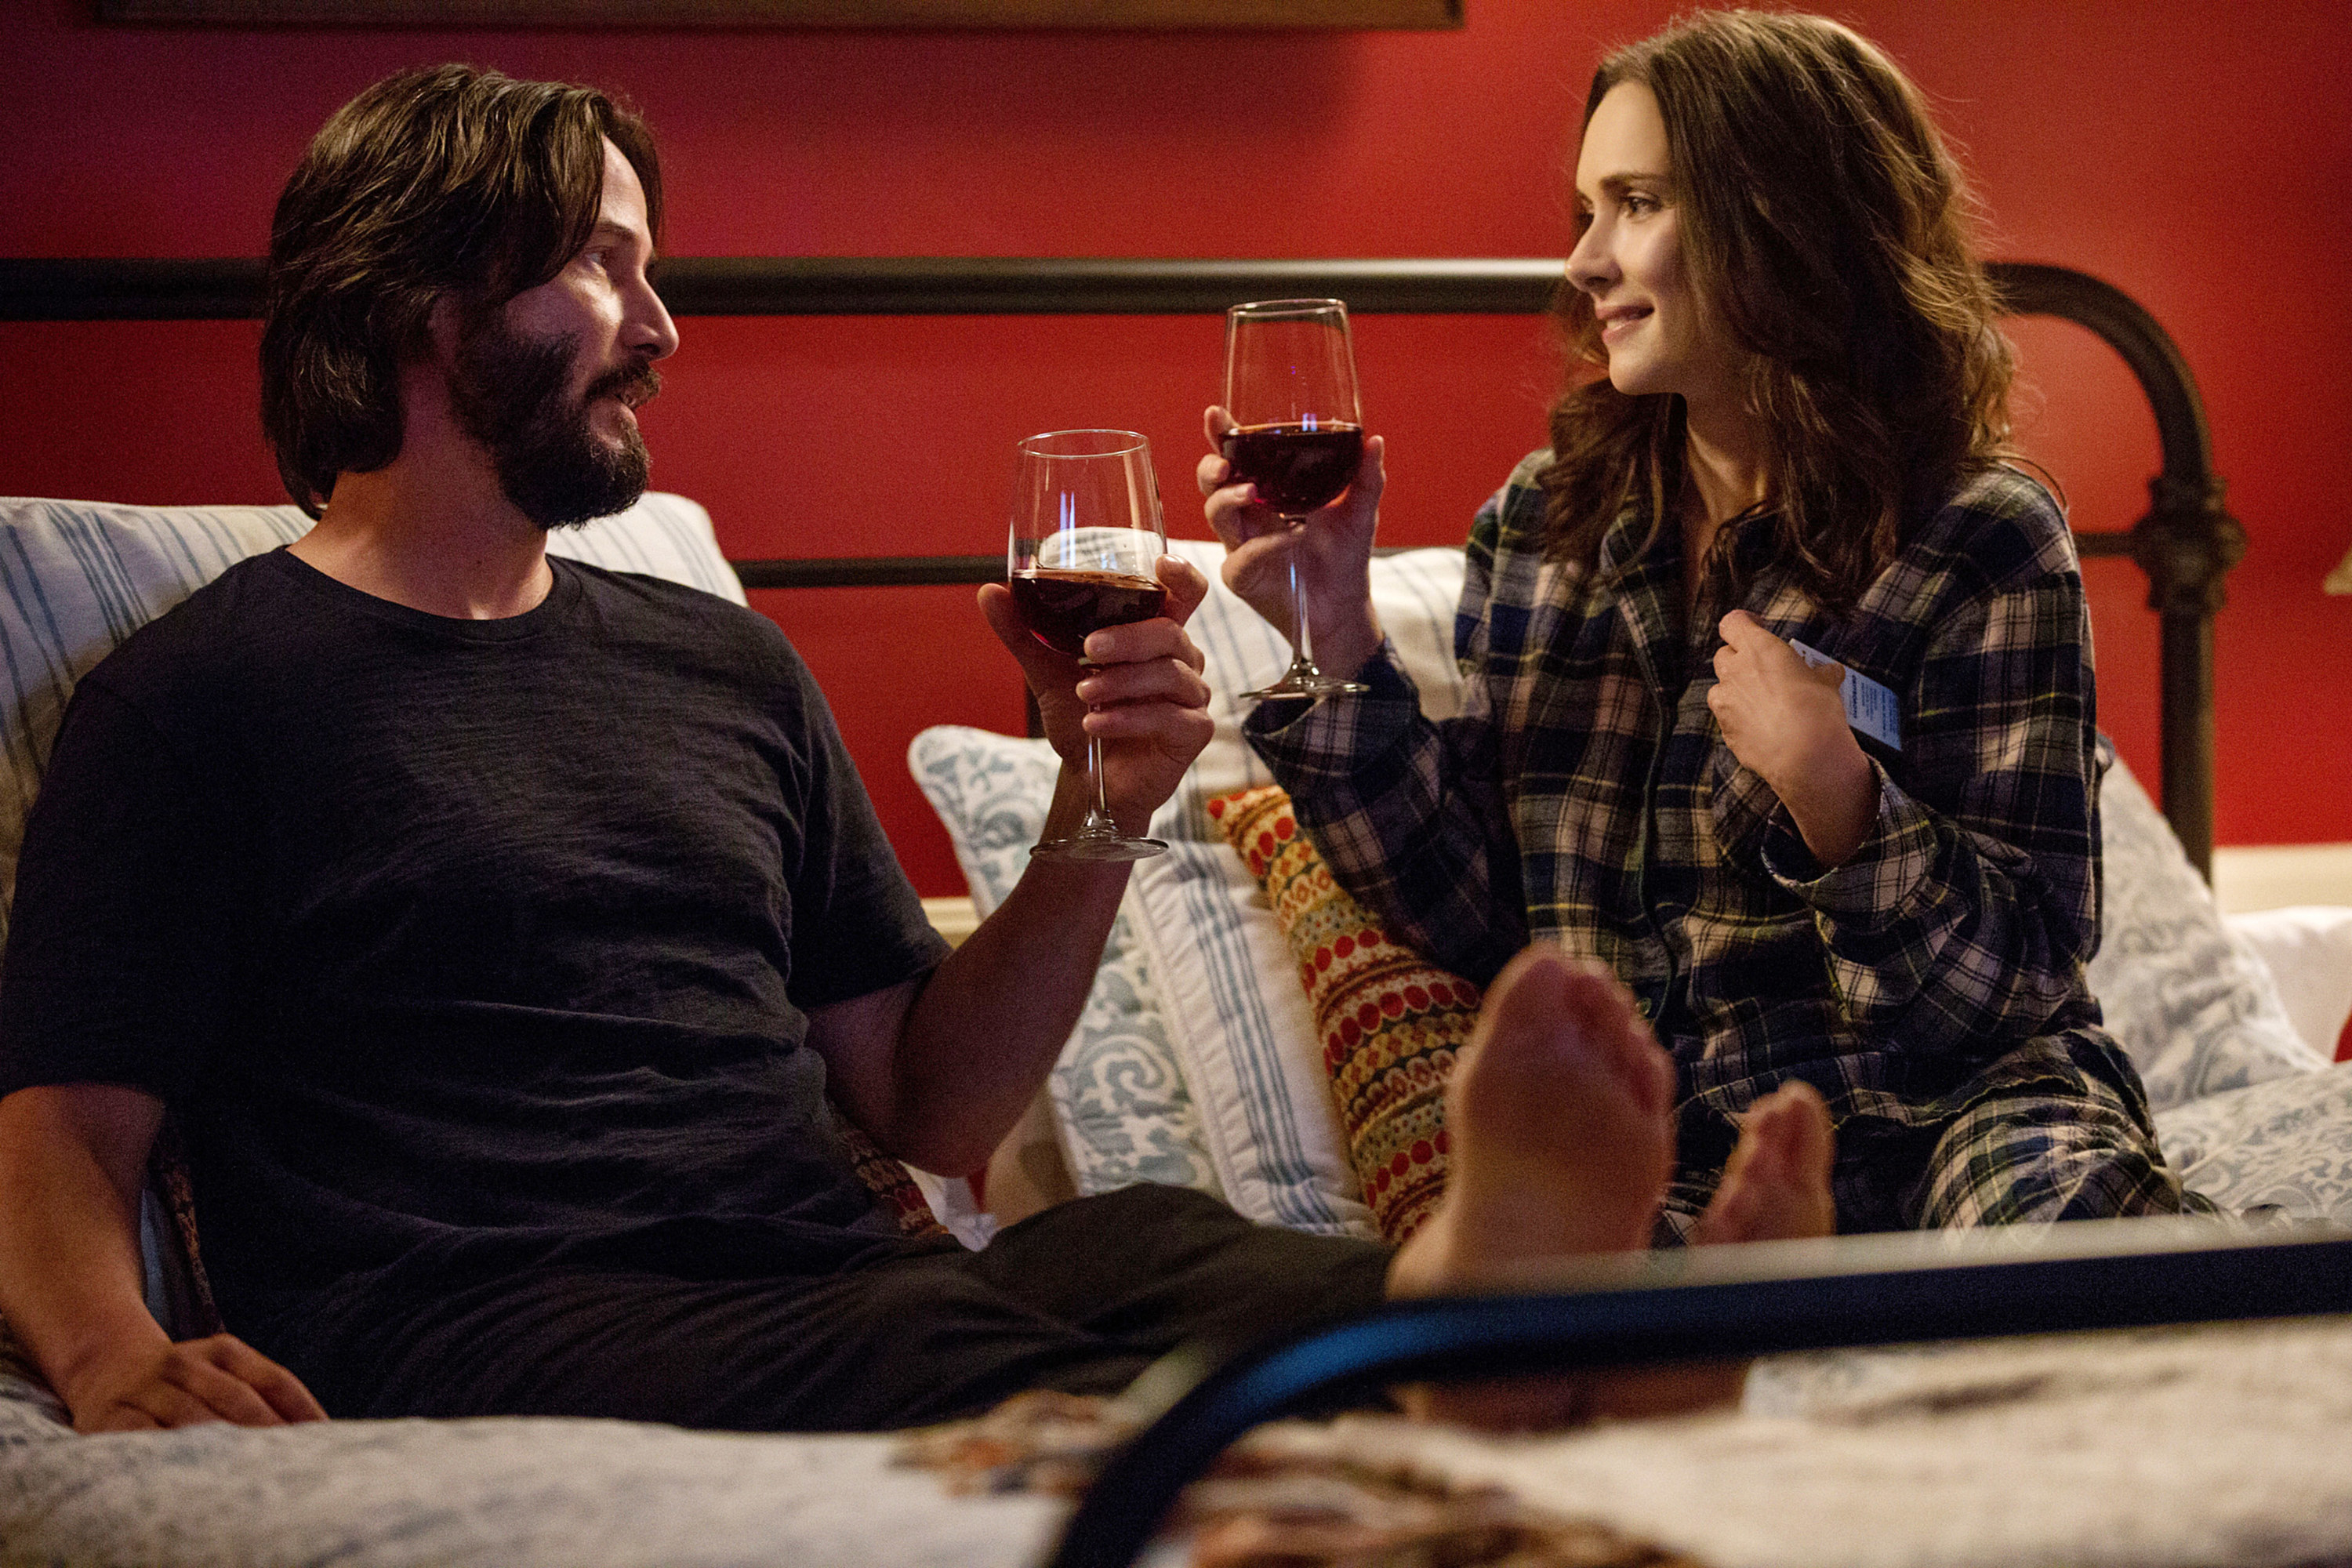 Keanu and Winona share a glass of wine in bed in the movie